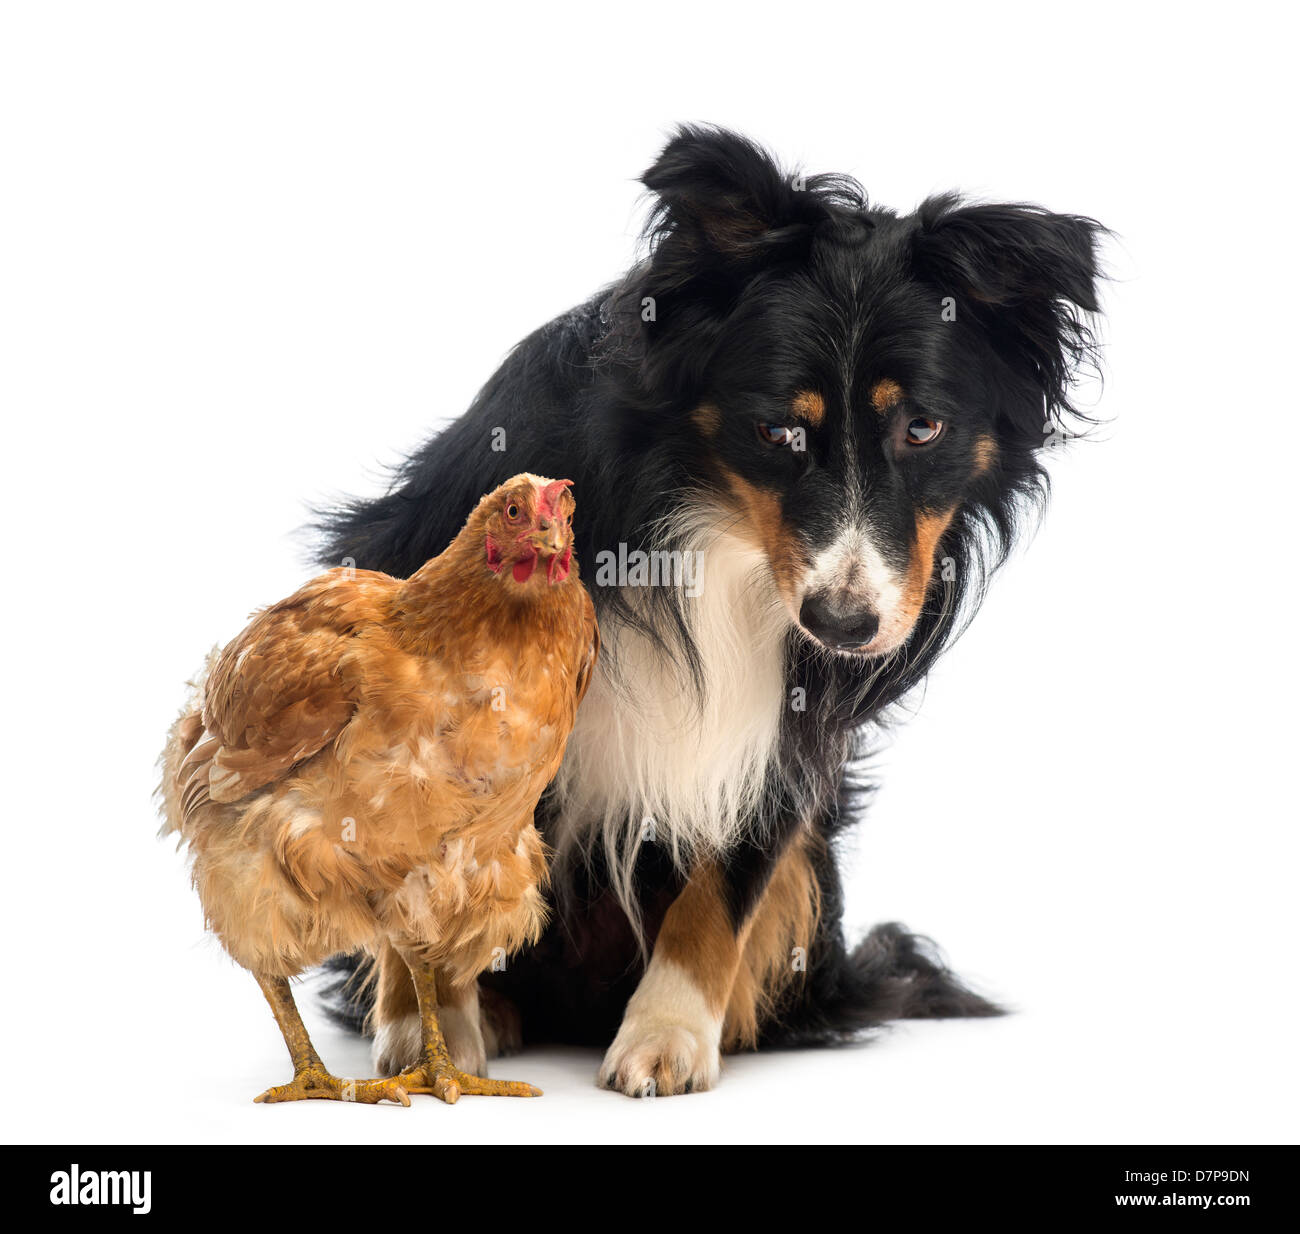 Border Collie, 8.5 years old, watching hen in front of white background Stock Photo